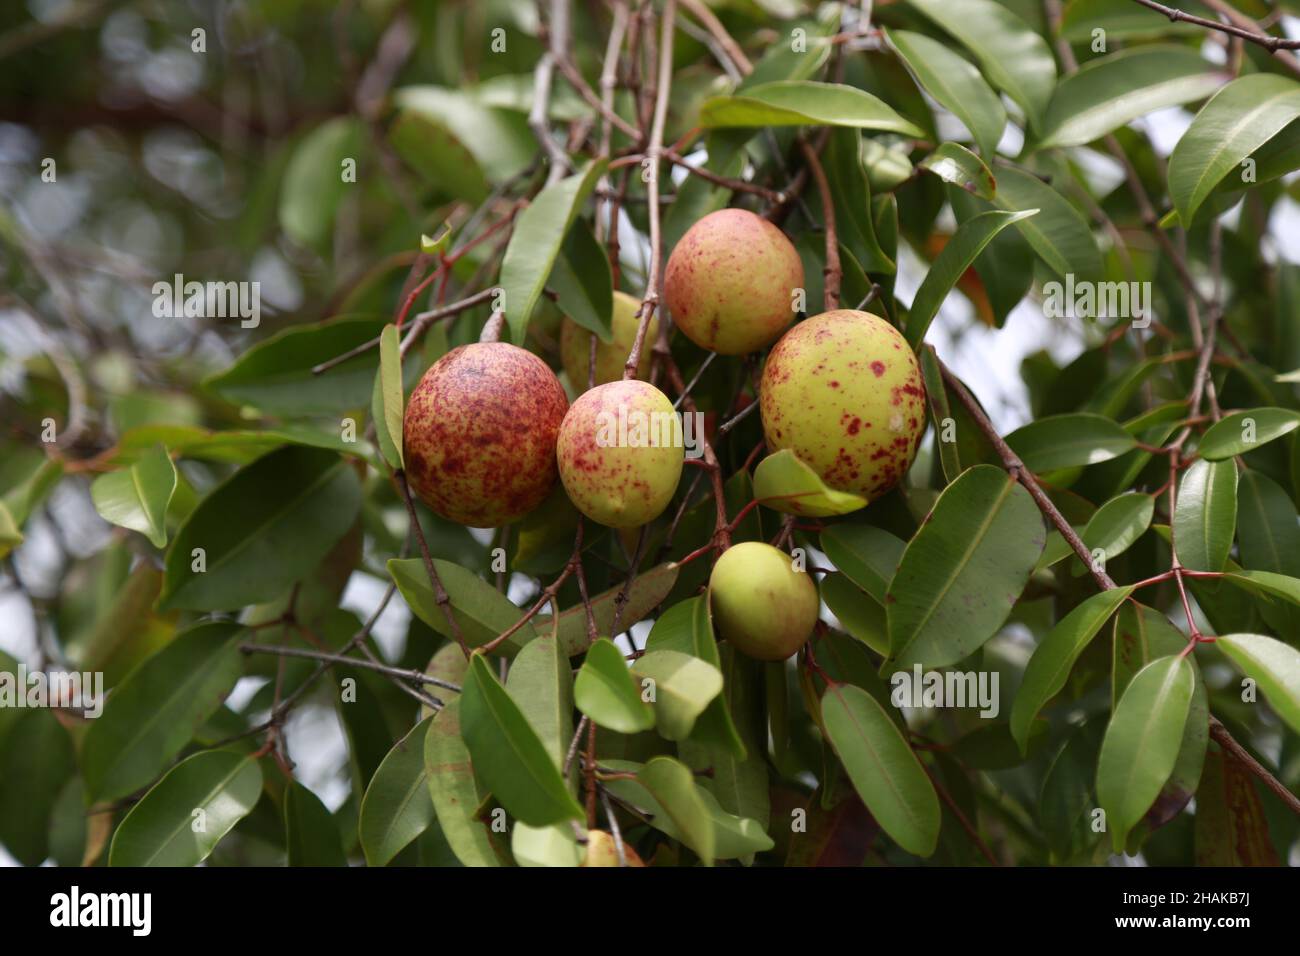 conde, bahia, brazil - march, 2015: Mangaba fruit on a mangaba tree in a plantation in the city of Conde. Stock Photo